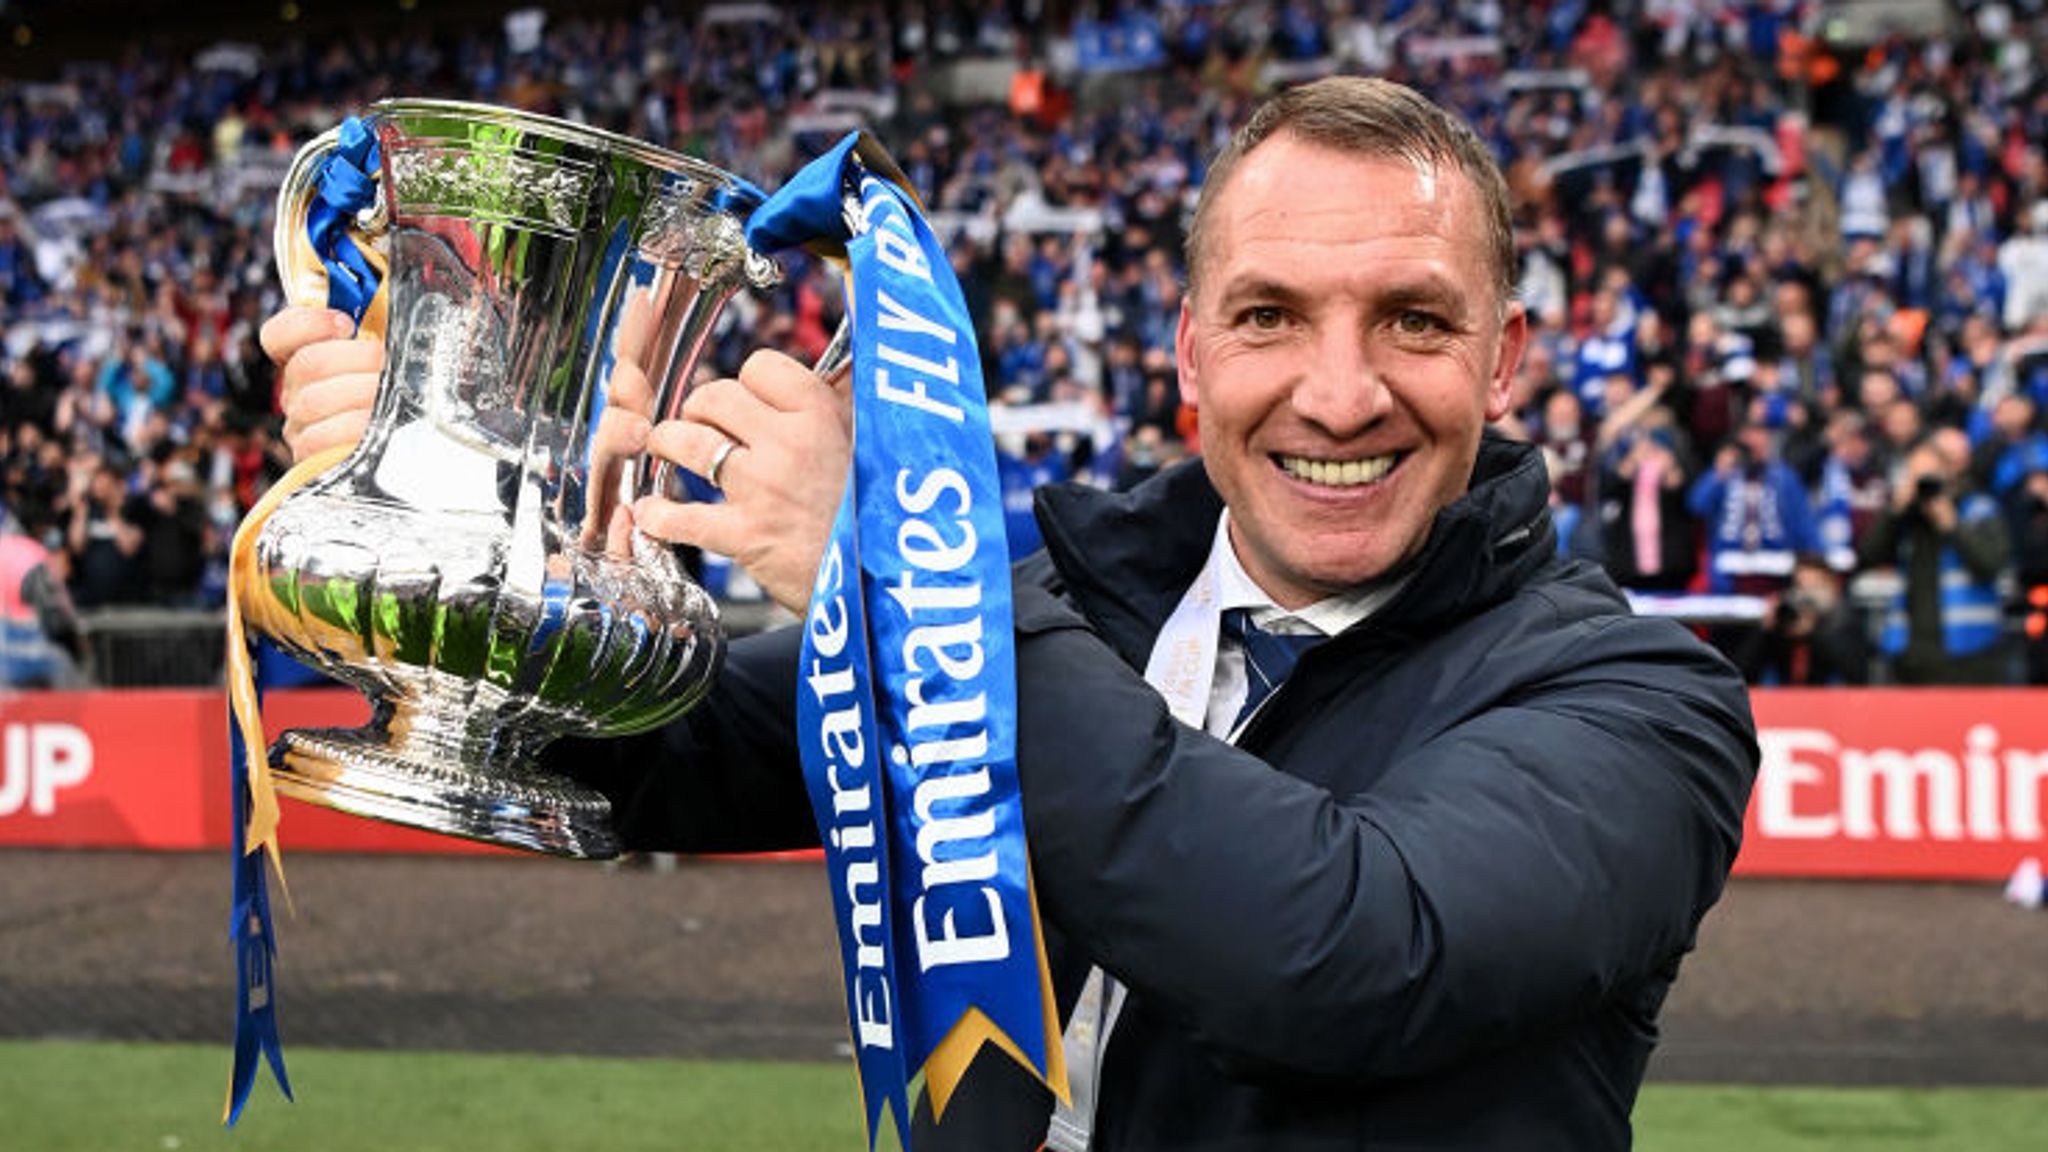 Brendan Rodgers hails Leicester's FA Cup win as a historic day for the club  as Thomas Tuchel calls Chelsea unlucky in final | Football News | Sky Sports